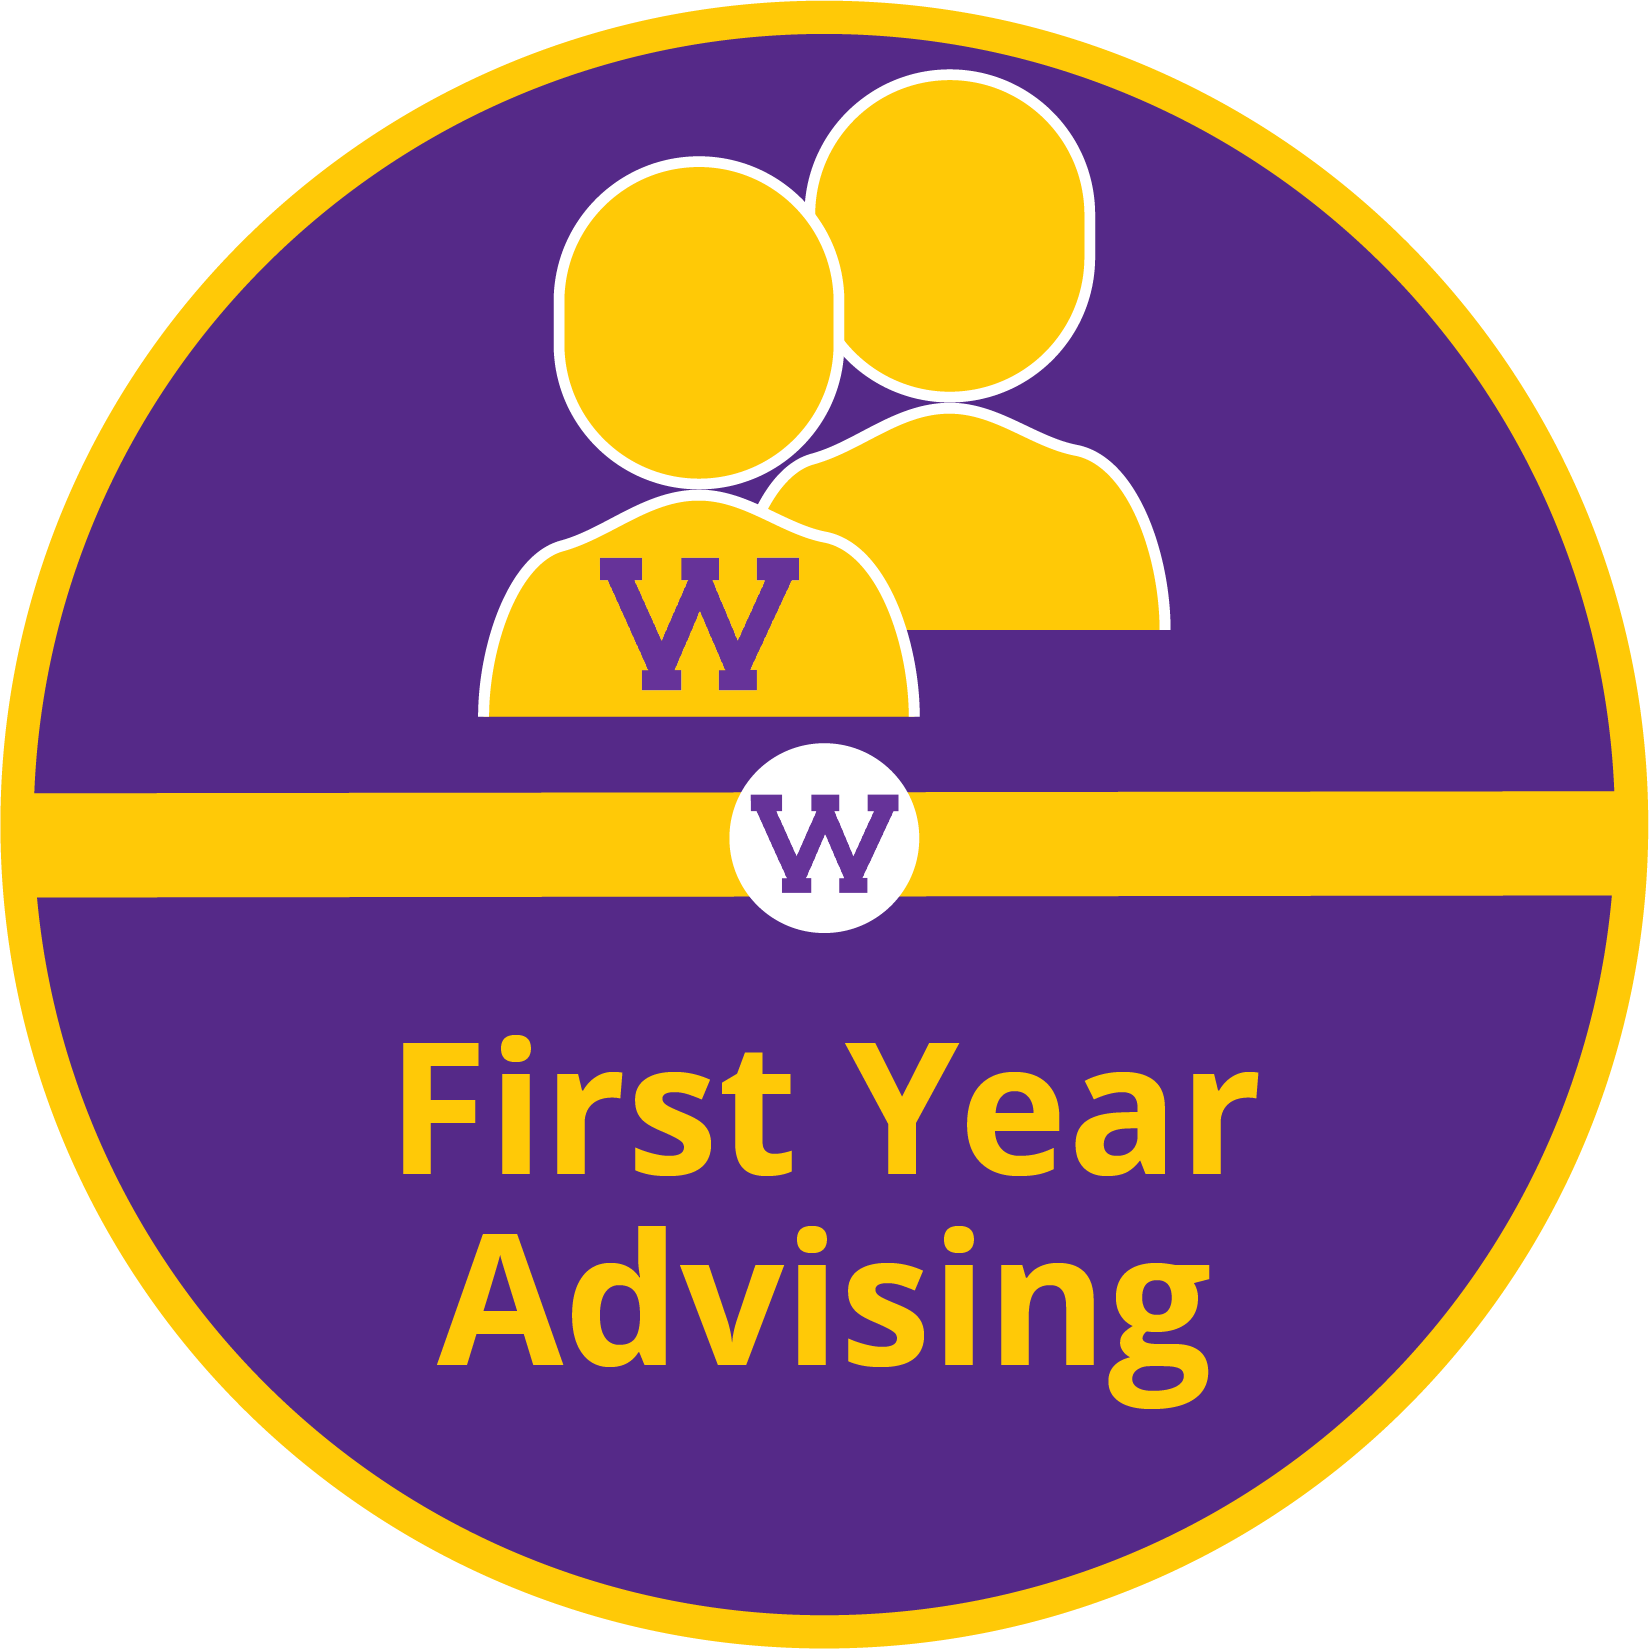 First Year Advising